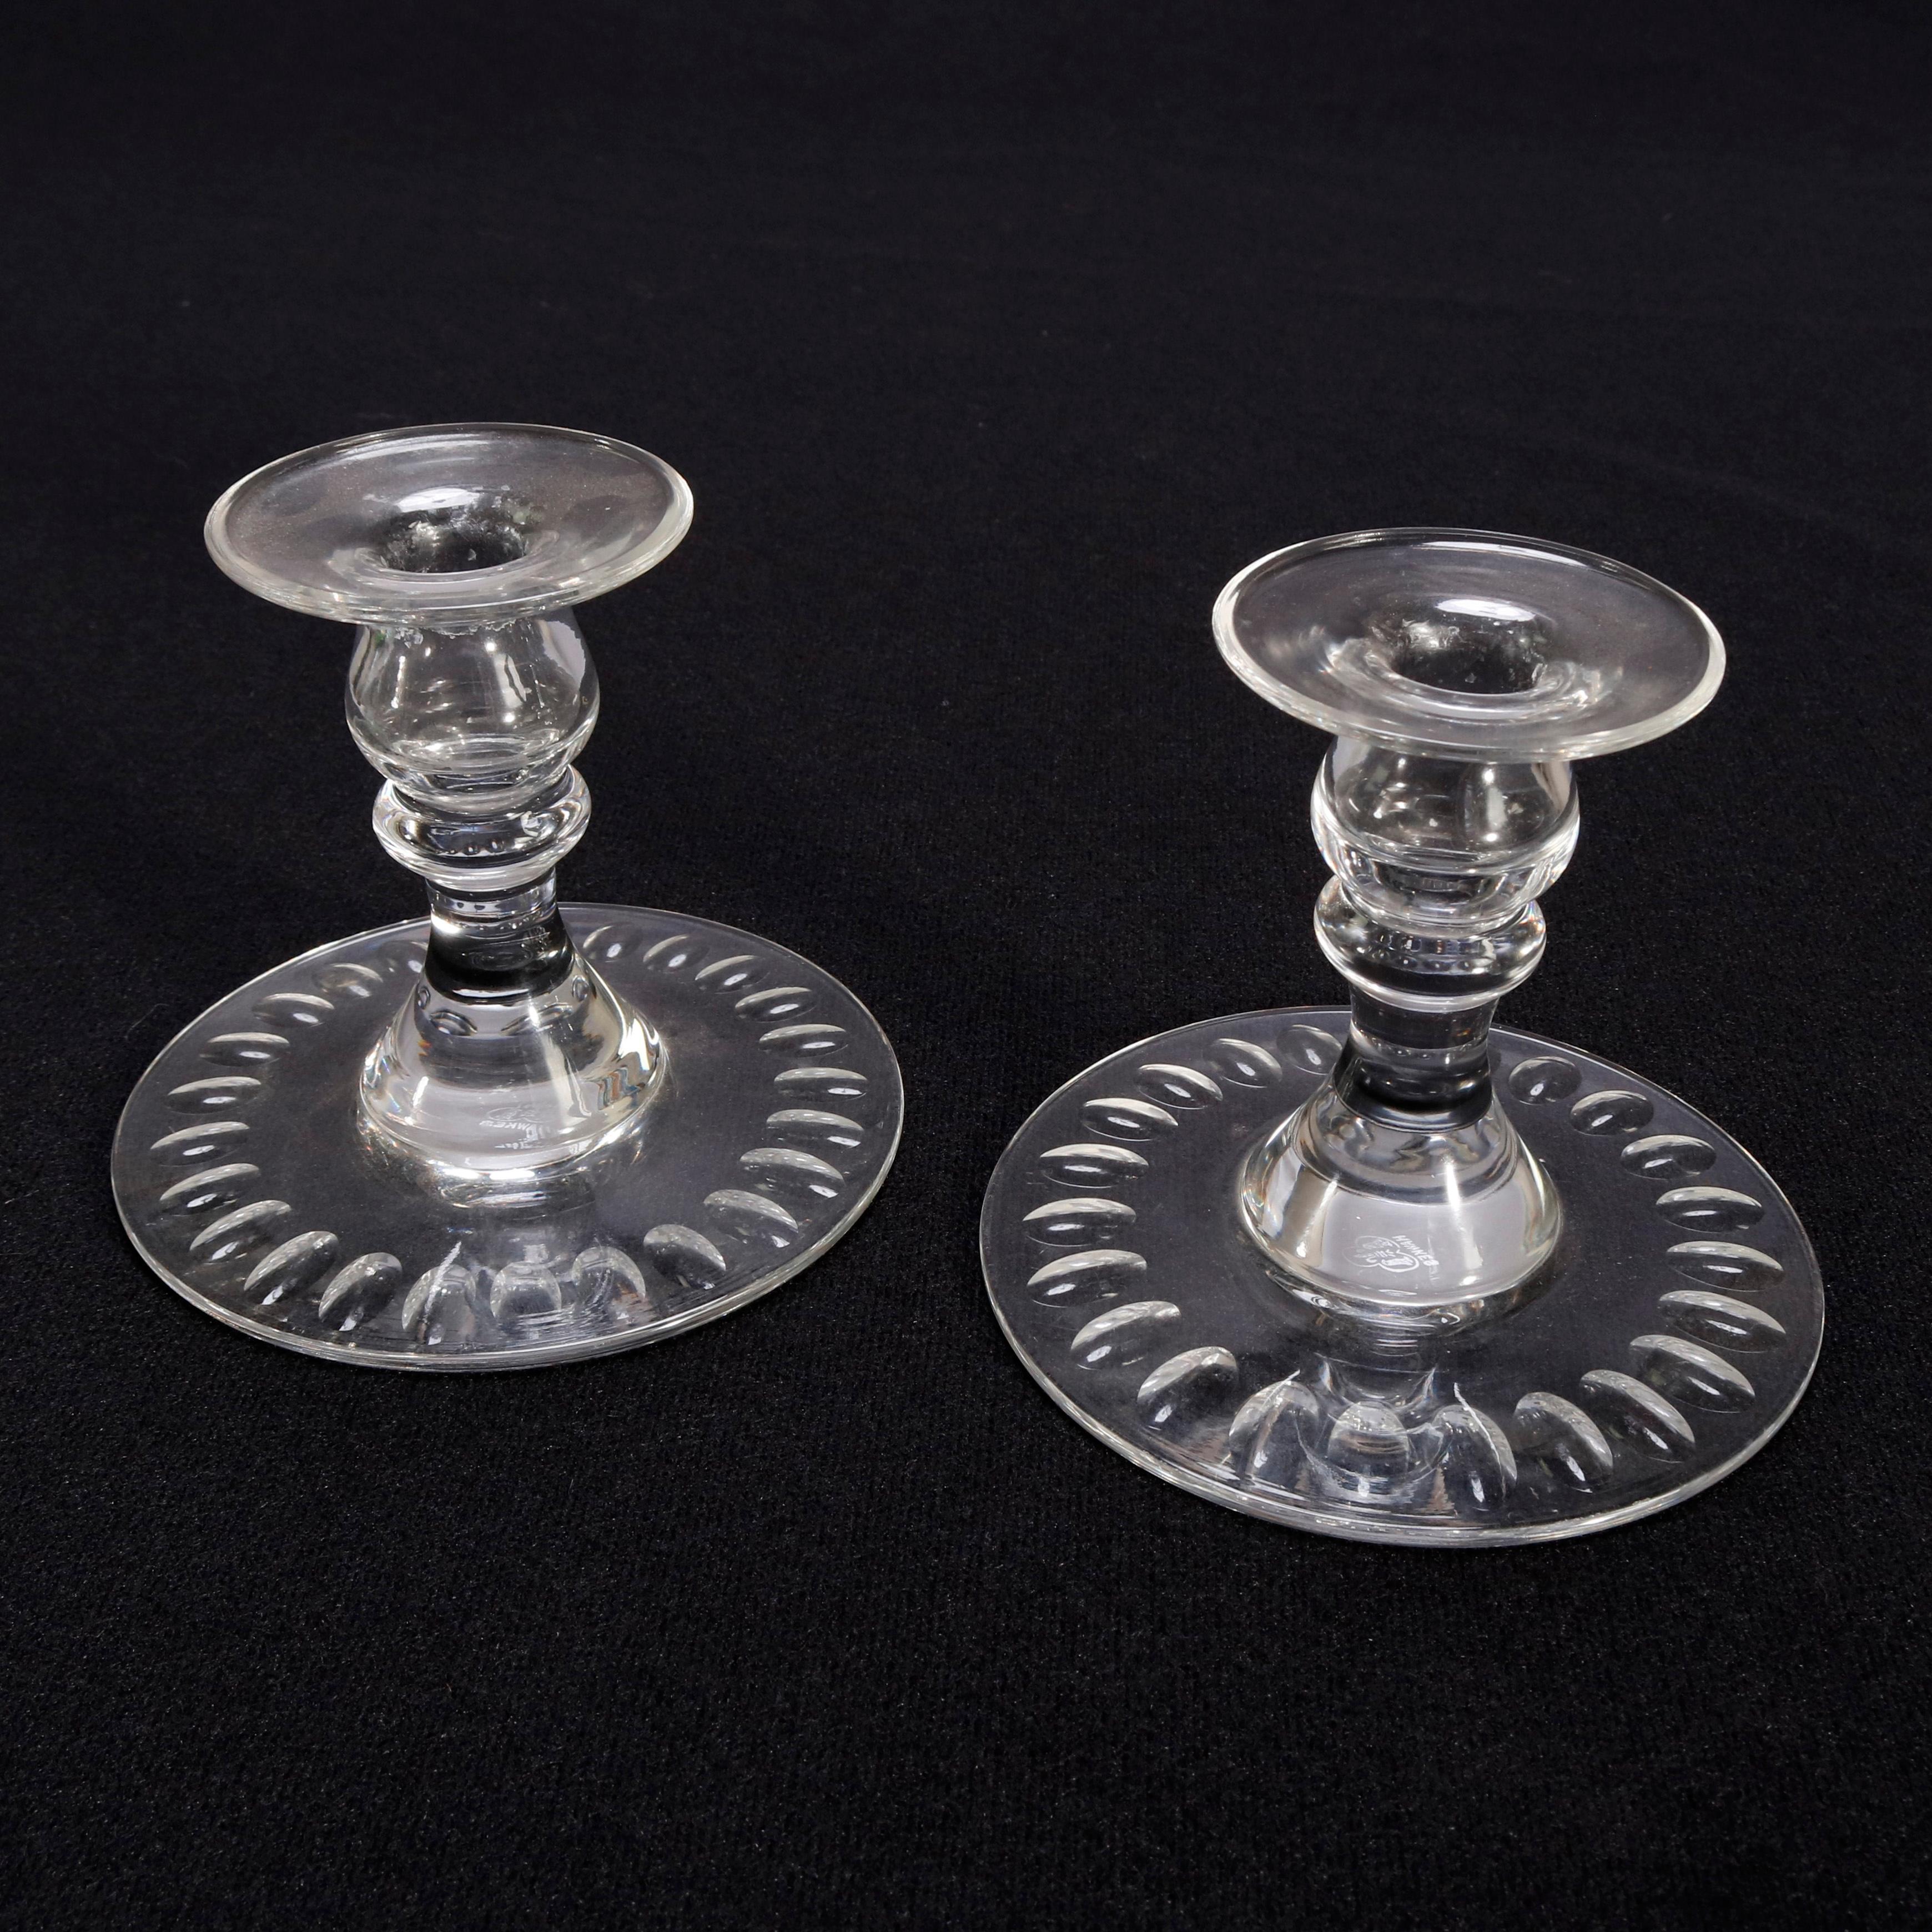 American Pair of Antique Hawkes Cut Crystal Thumbprint Candlesticks, Signed, 20th Century